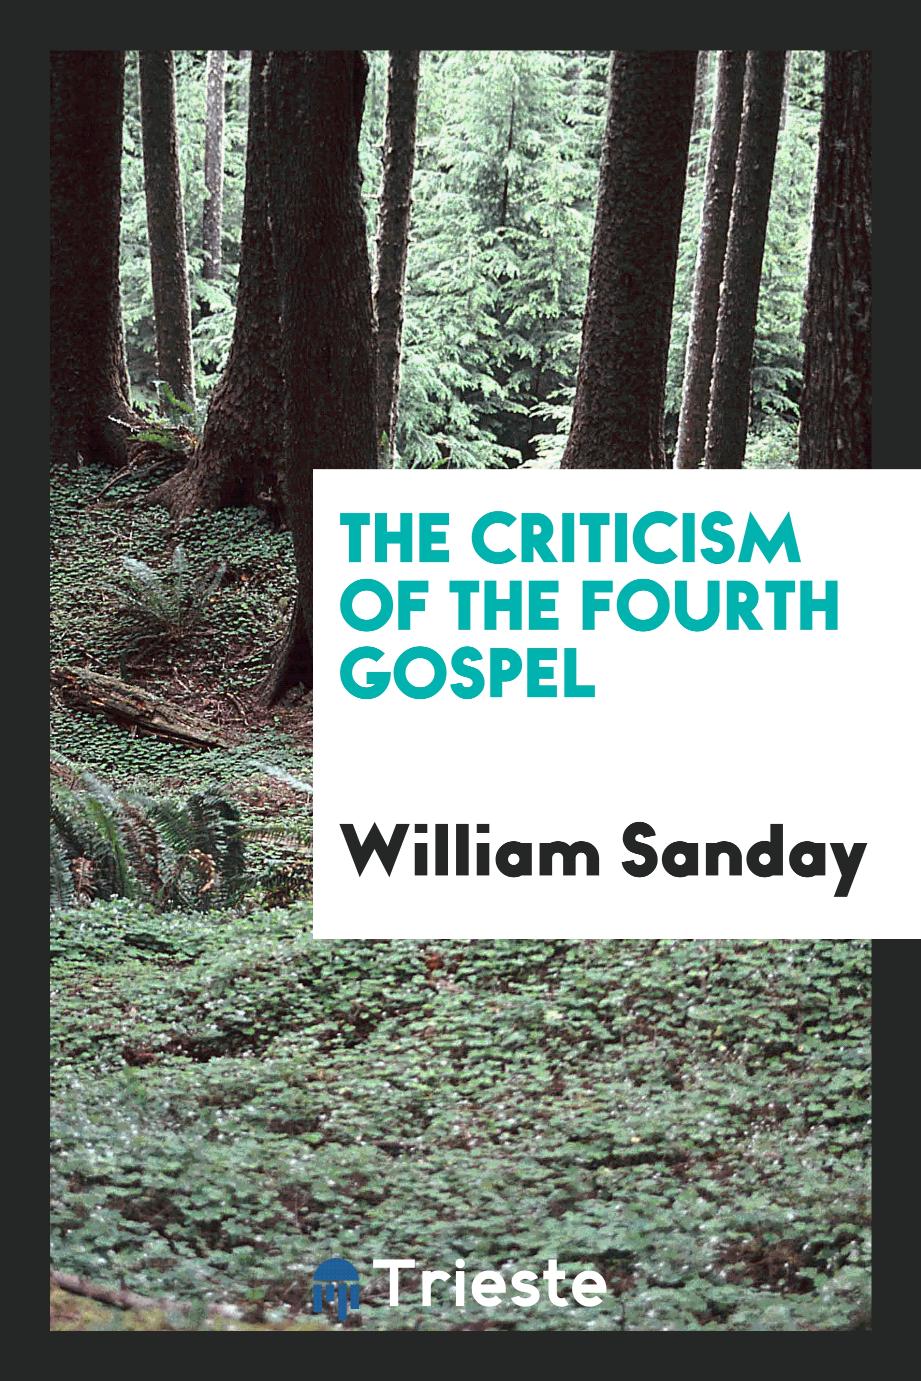 The criticism of the Fourth gospel